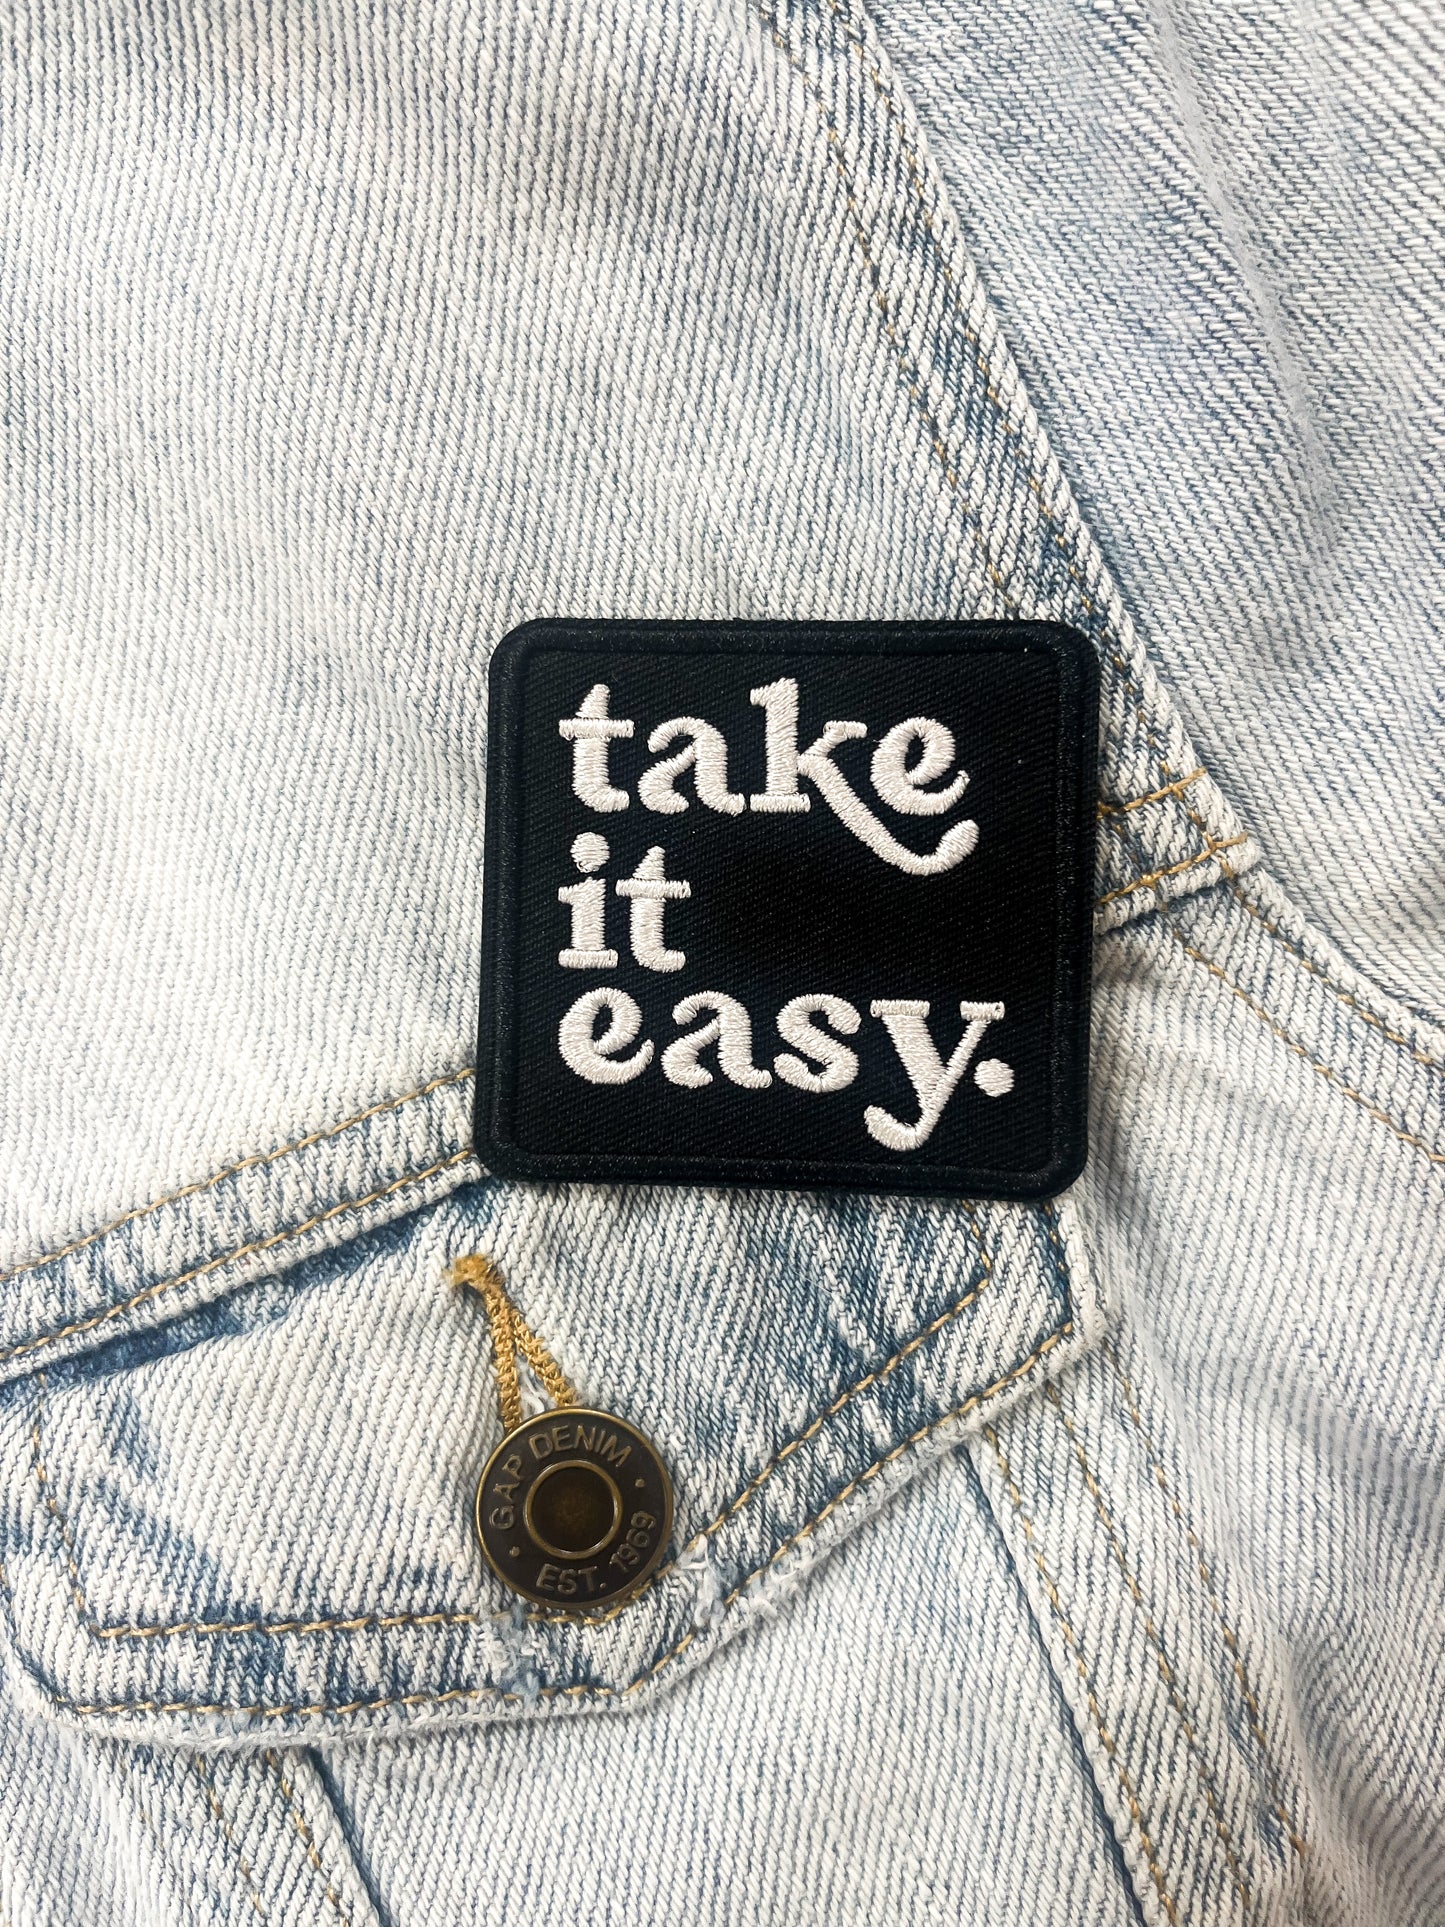 Take it easy patch